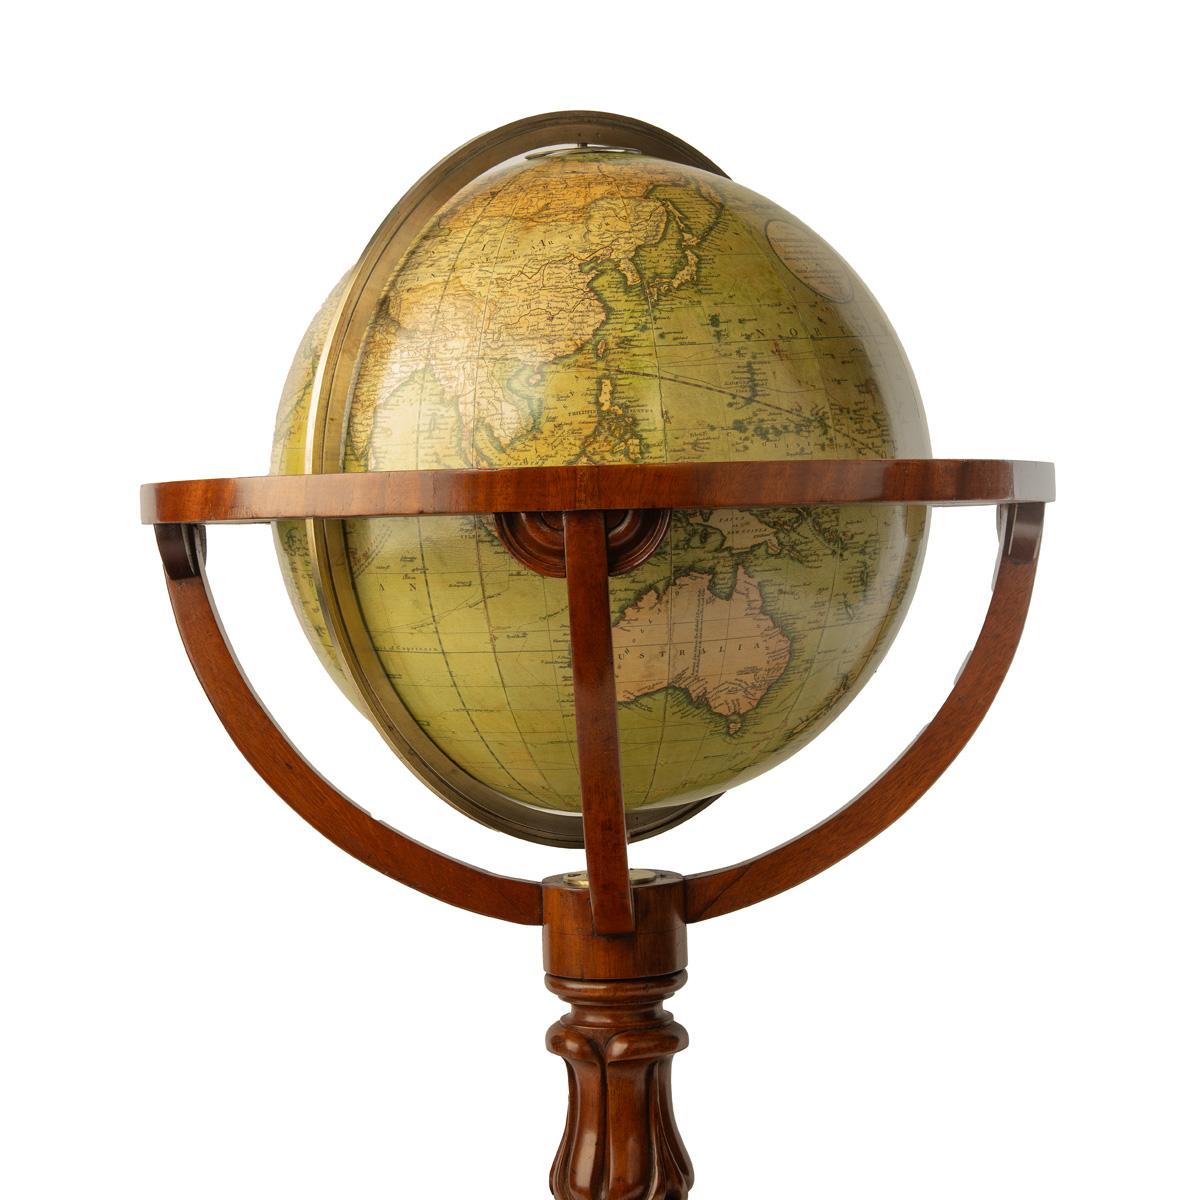 A Cary’s 15 inch terrestrial globe, 1849, set in a mahogany stand with a turned baluster support on three splayed scroll legs centred on a compass rose, the cartouche stating ‘Cary’s New Terrestrial Globe, Drawn from the most recent Geographical